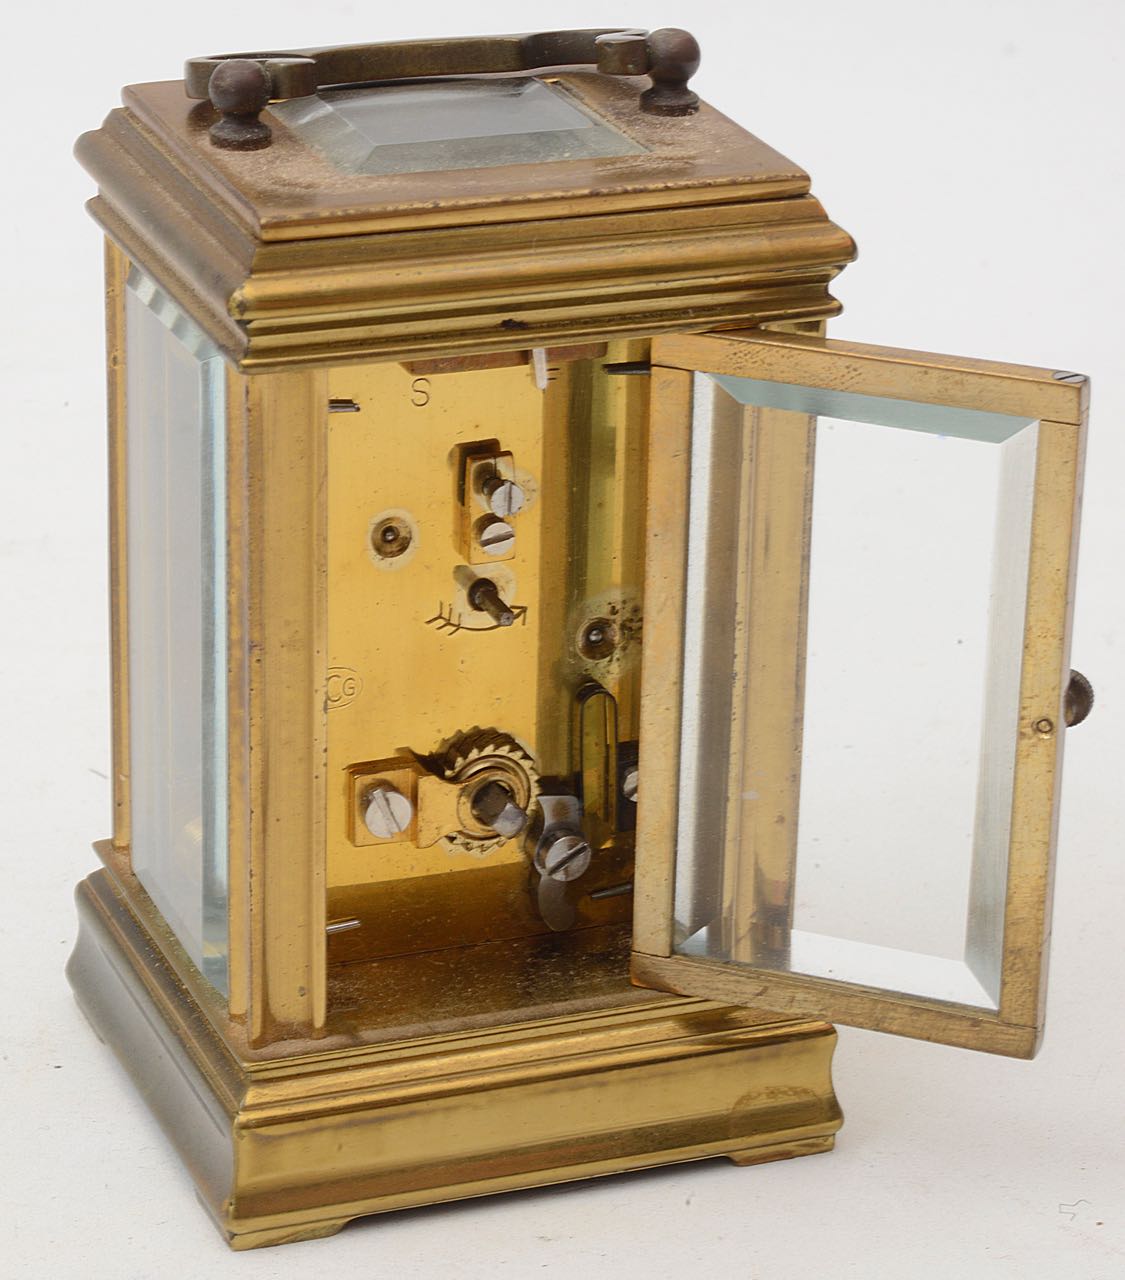 An early 20th century brass miniature carriage clock - Image 2 of 2